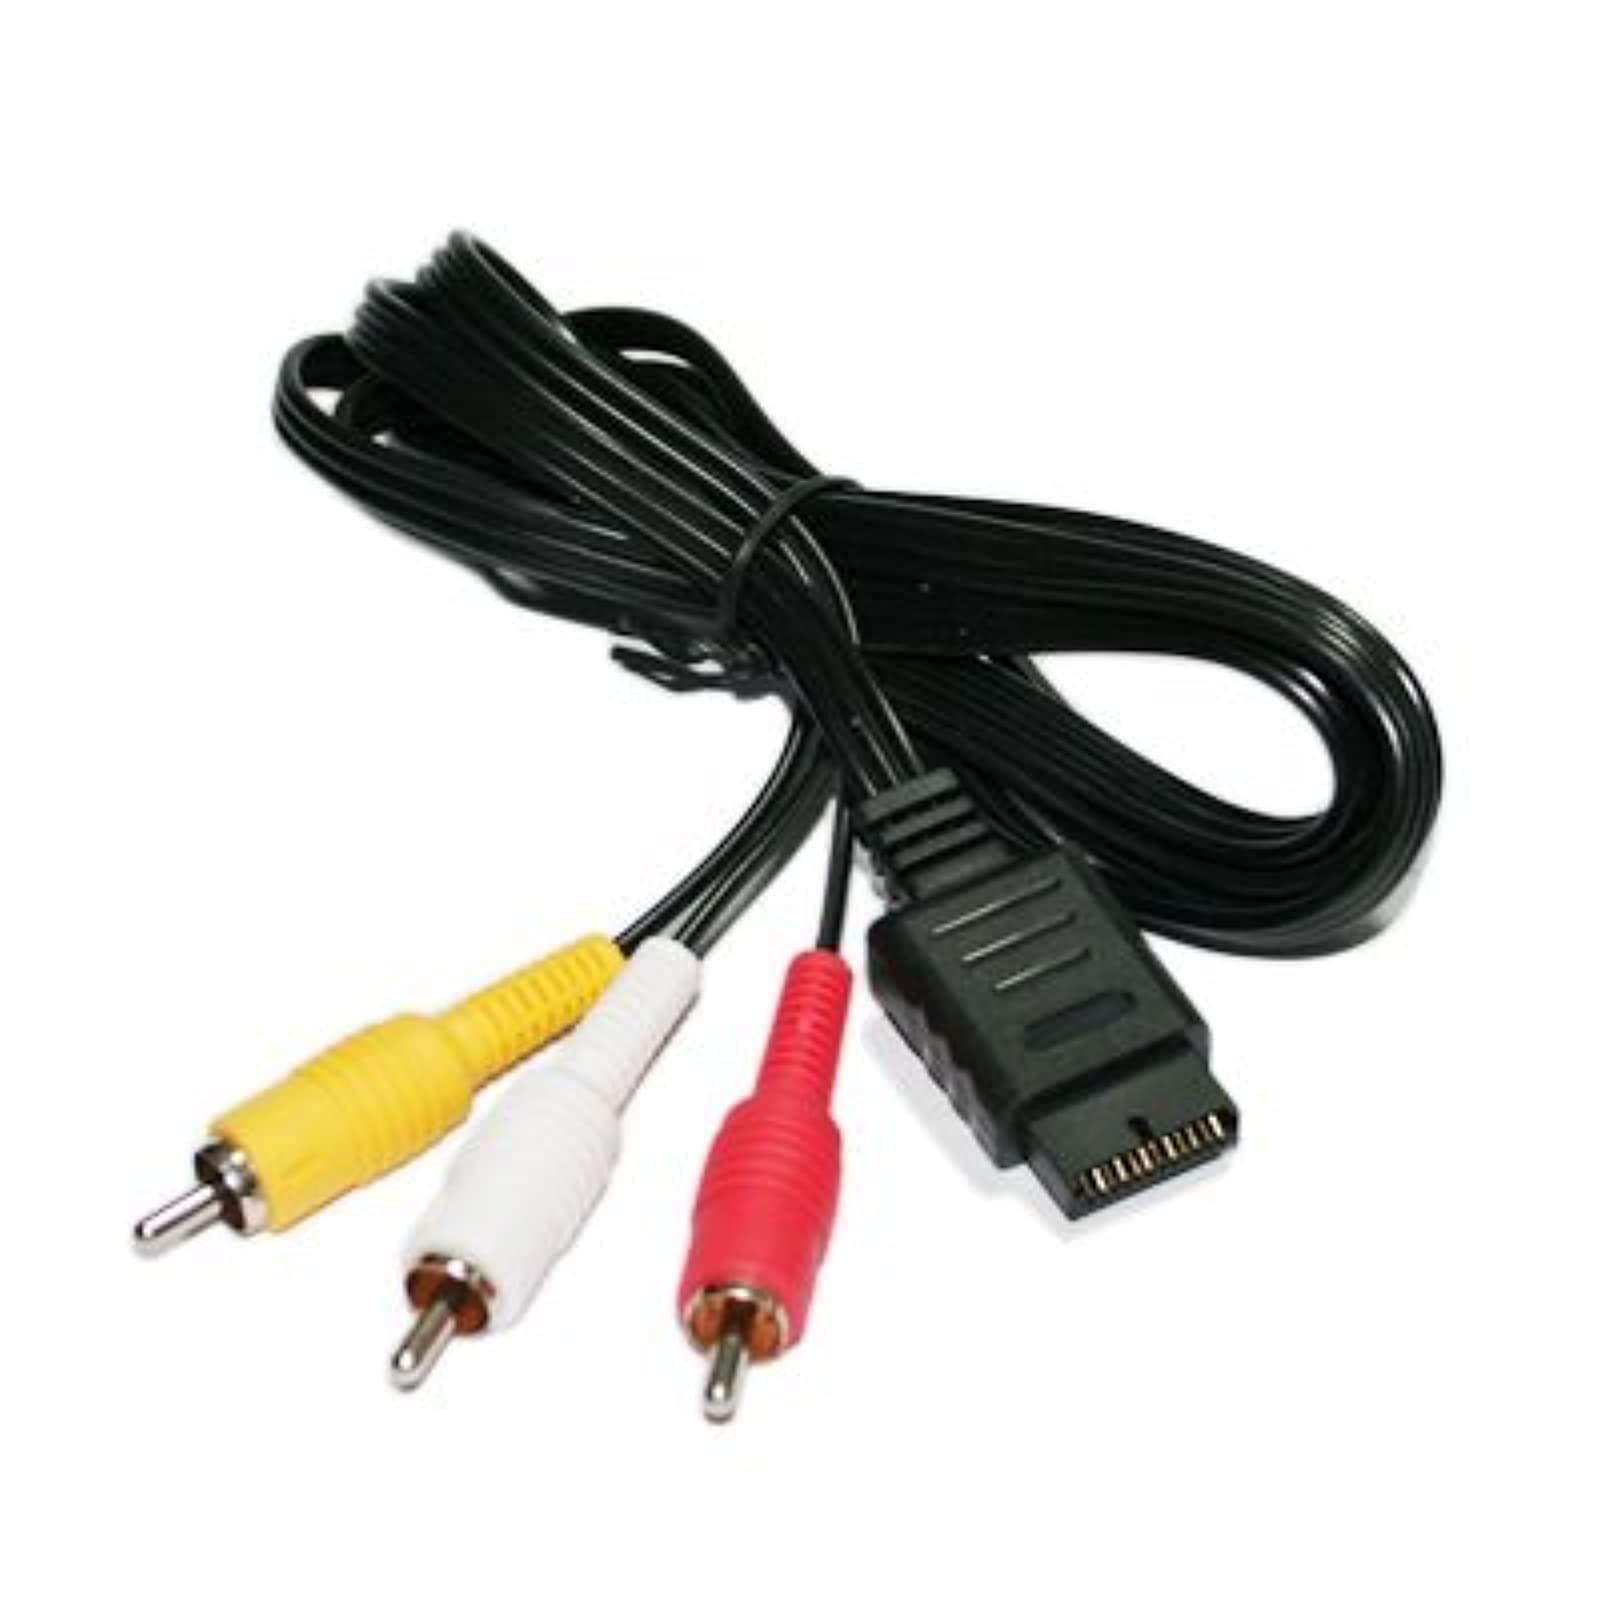 Video cables connected and unplugged